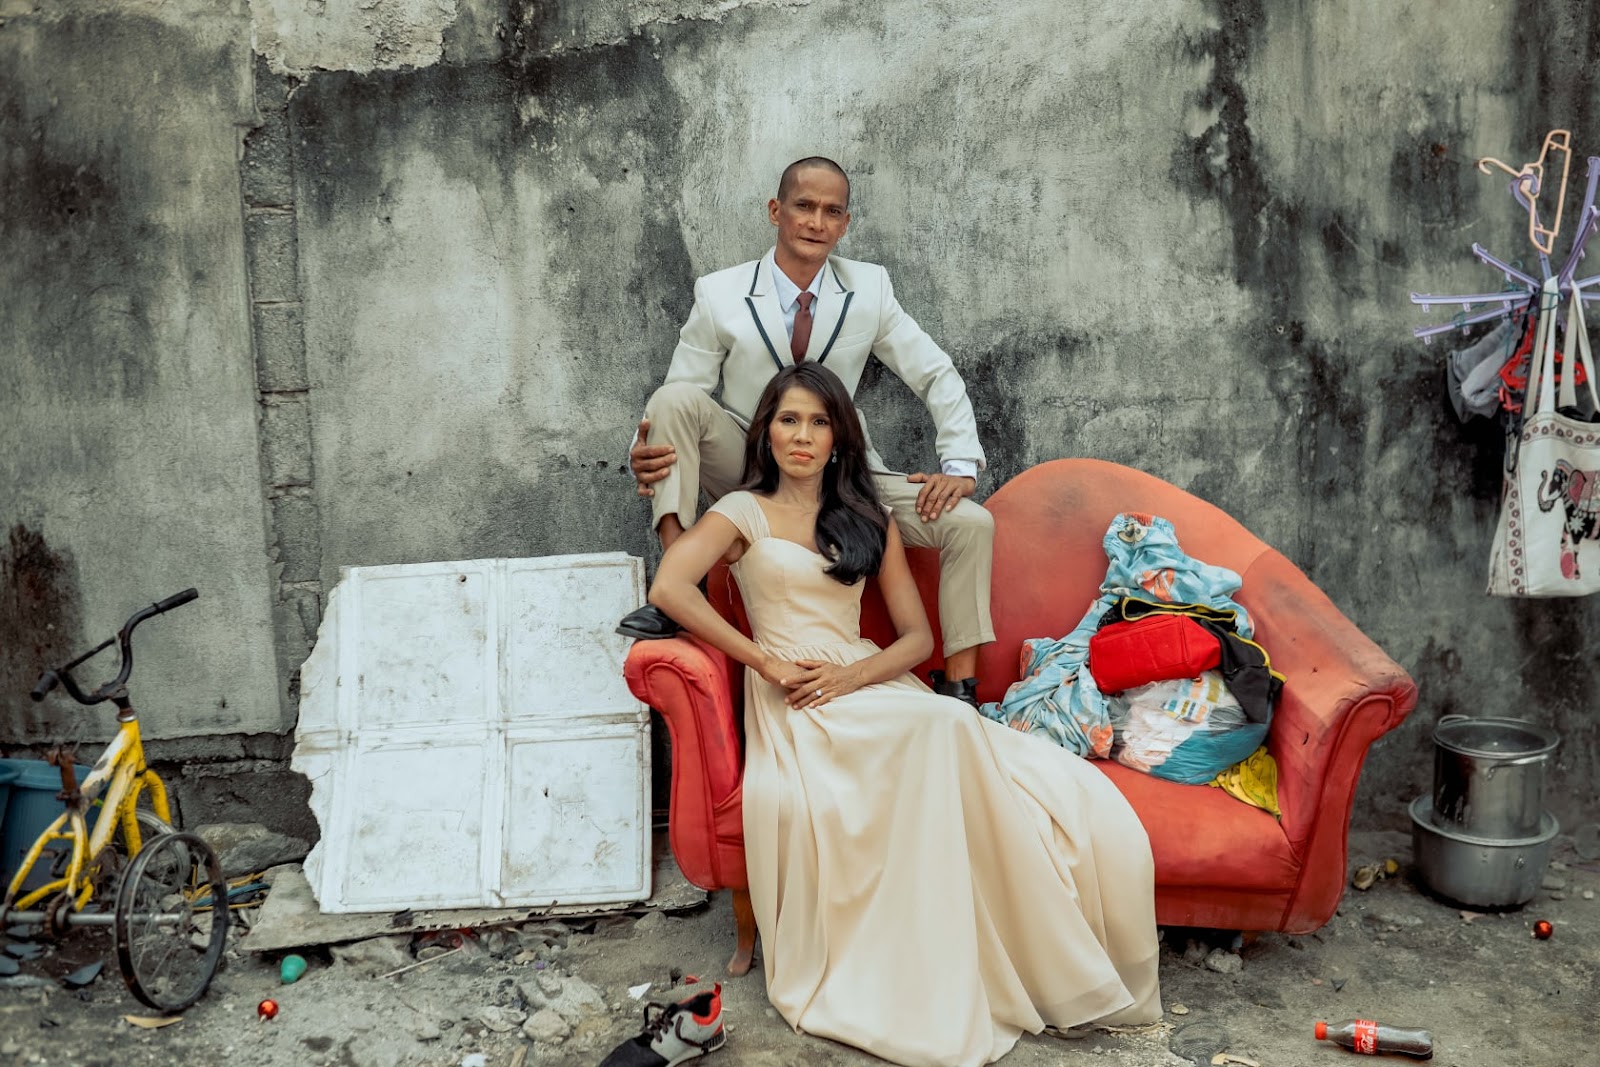 Rommel and Rosalyn wear another gown and suit for the photo shoot